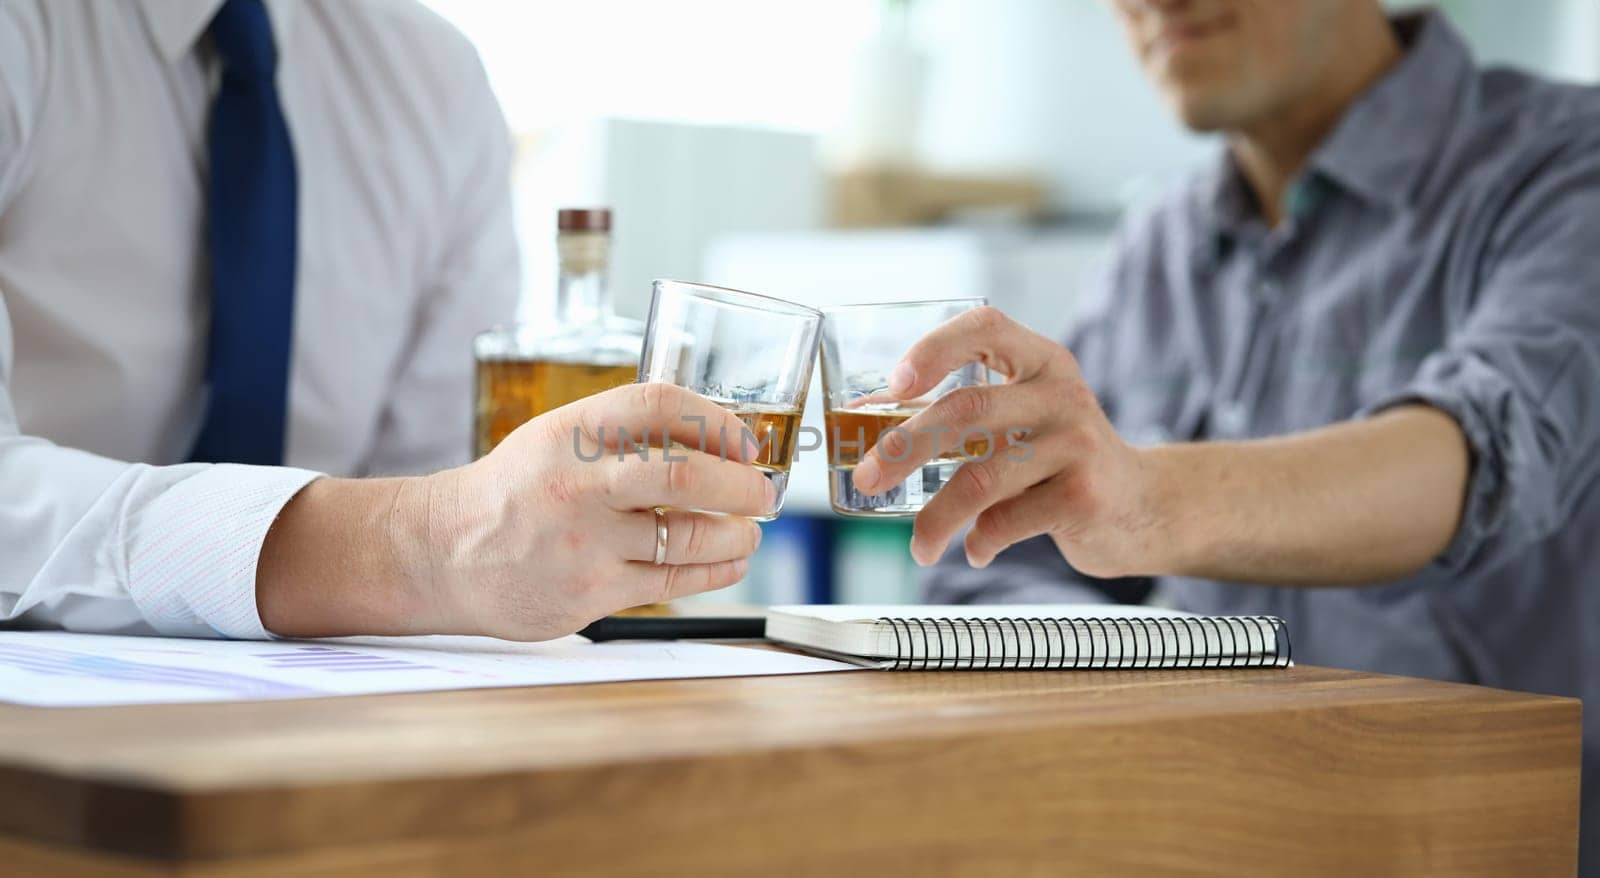 Men in suits drink alcohol in workplace at office. Communication business partners and solving important issues. Person is addicted to alcohol. Signing of an agreement on overcoming financial crisis